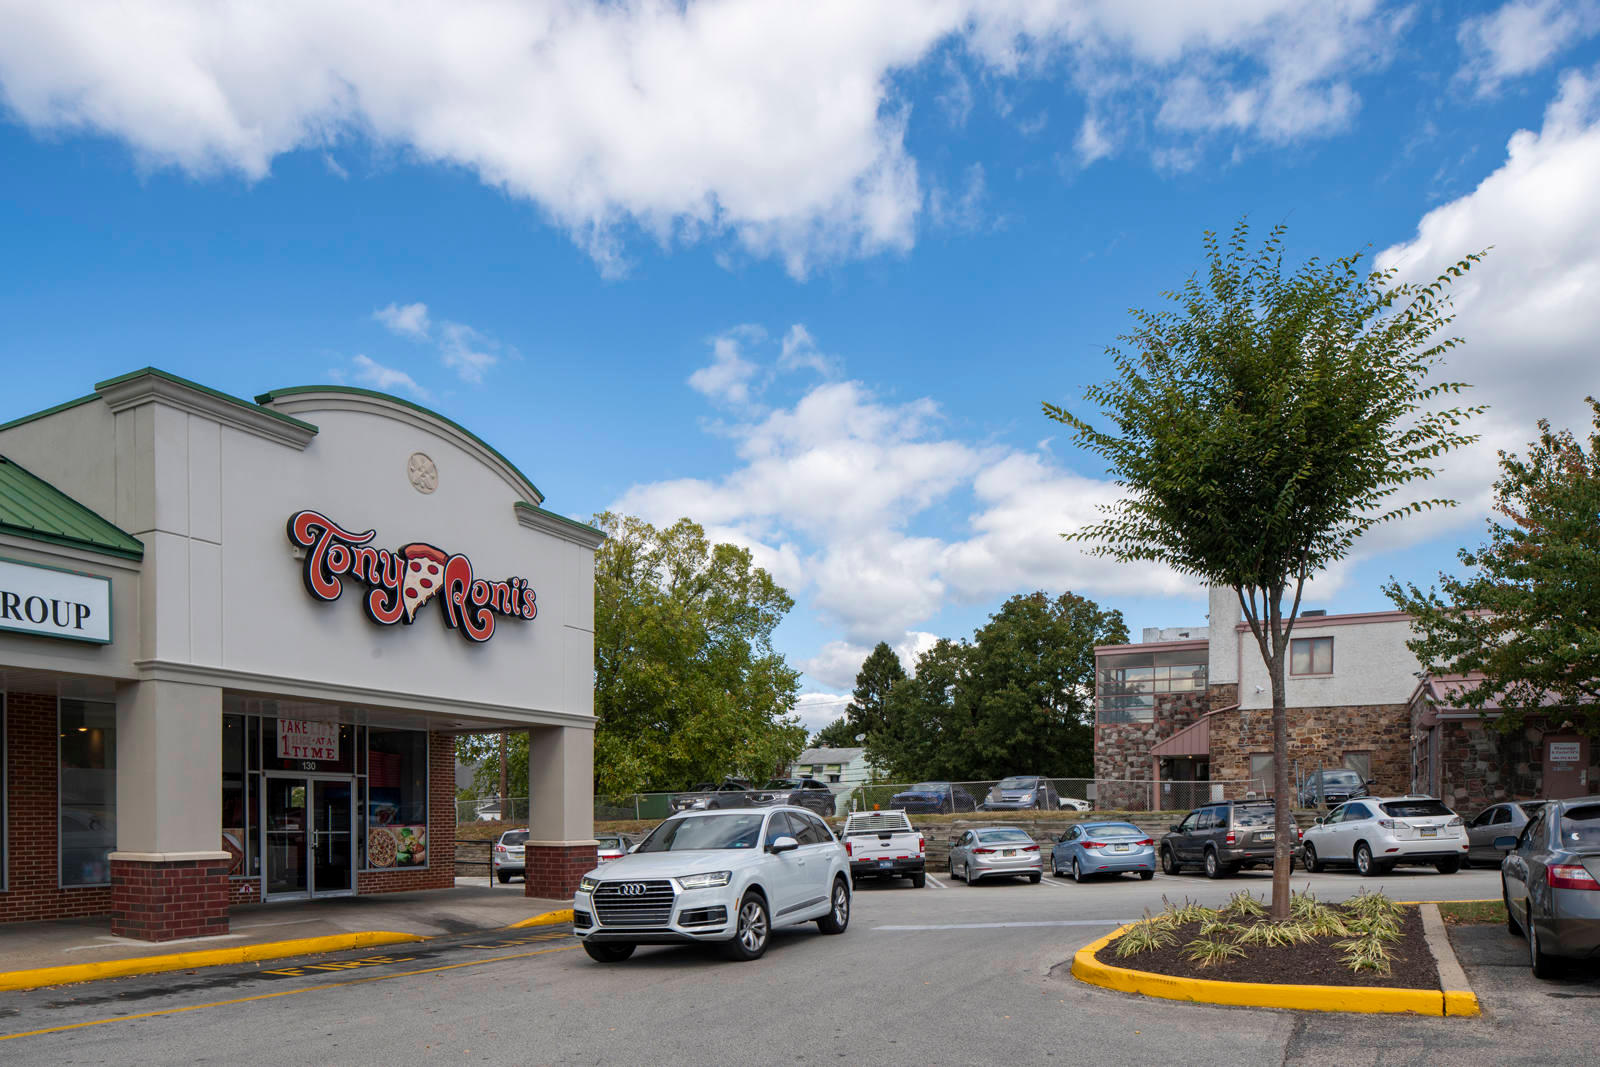 Tony Roni's at Plymouth Square Shopping Center